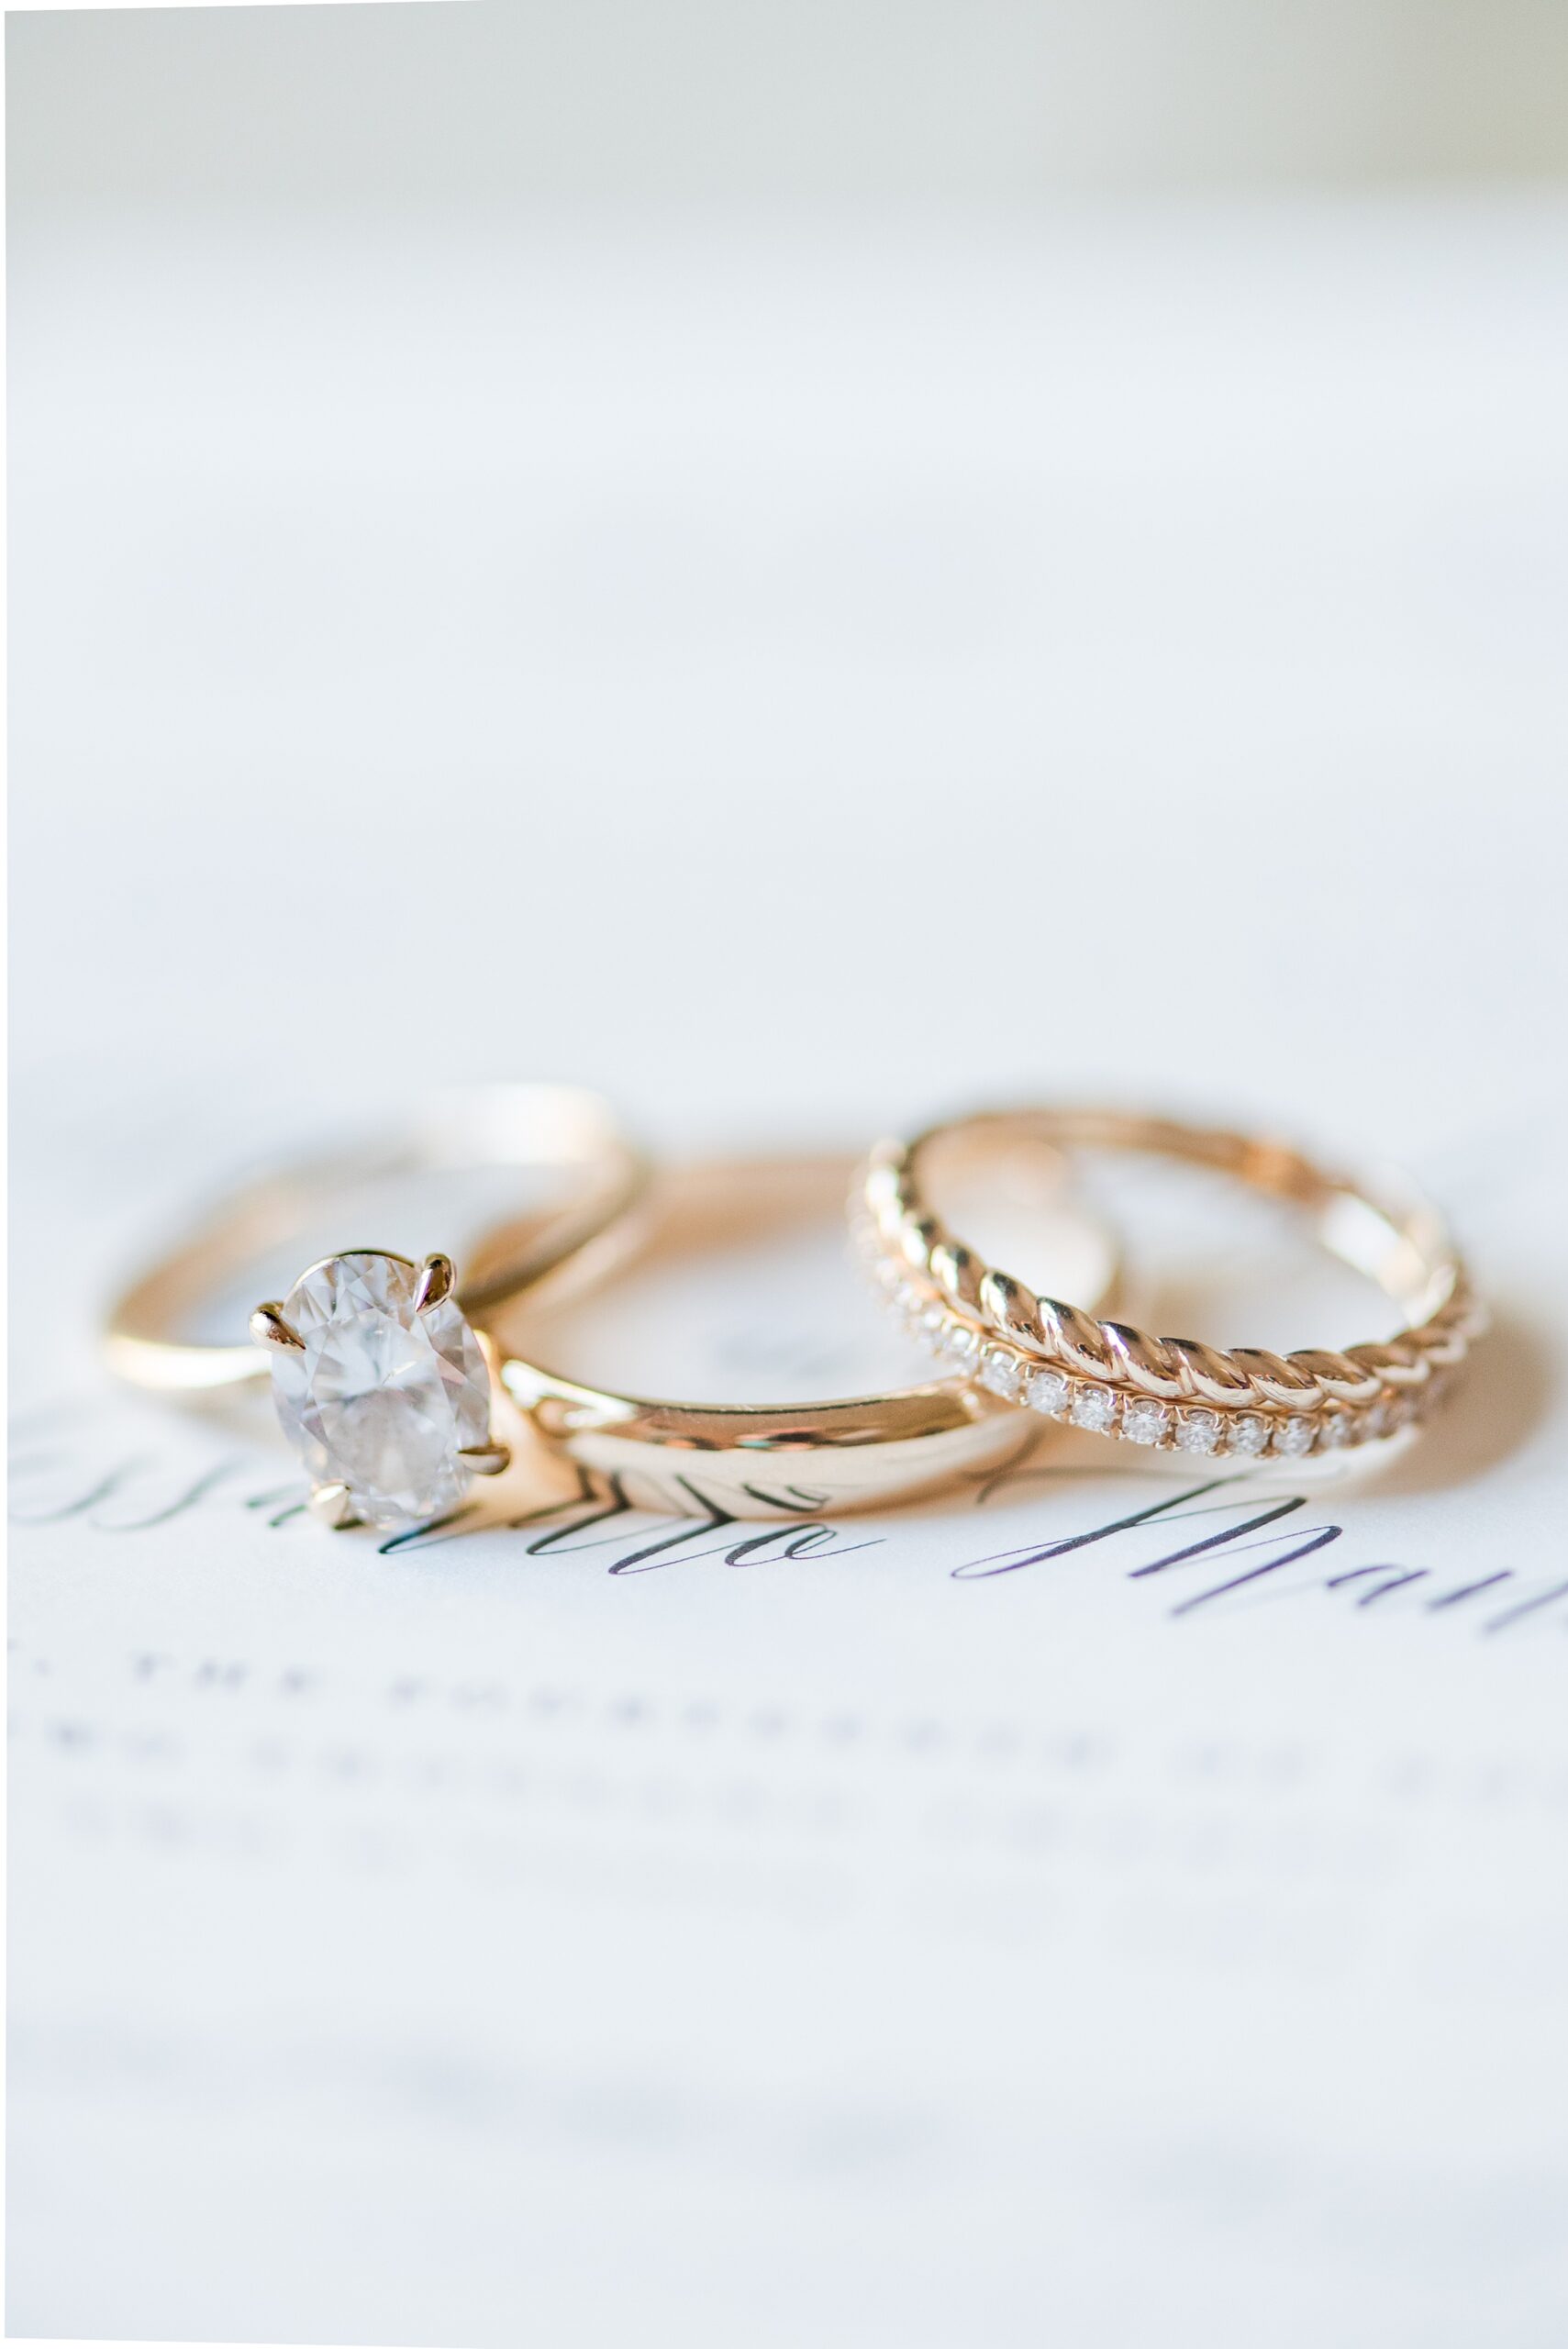 Details of wedding bands and ring sitting on an invitation